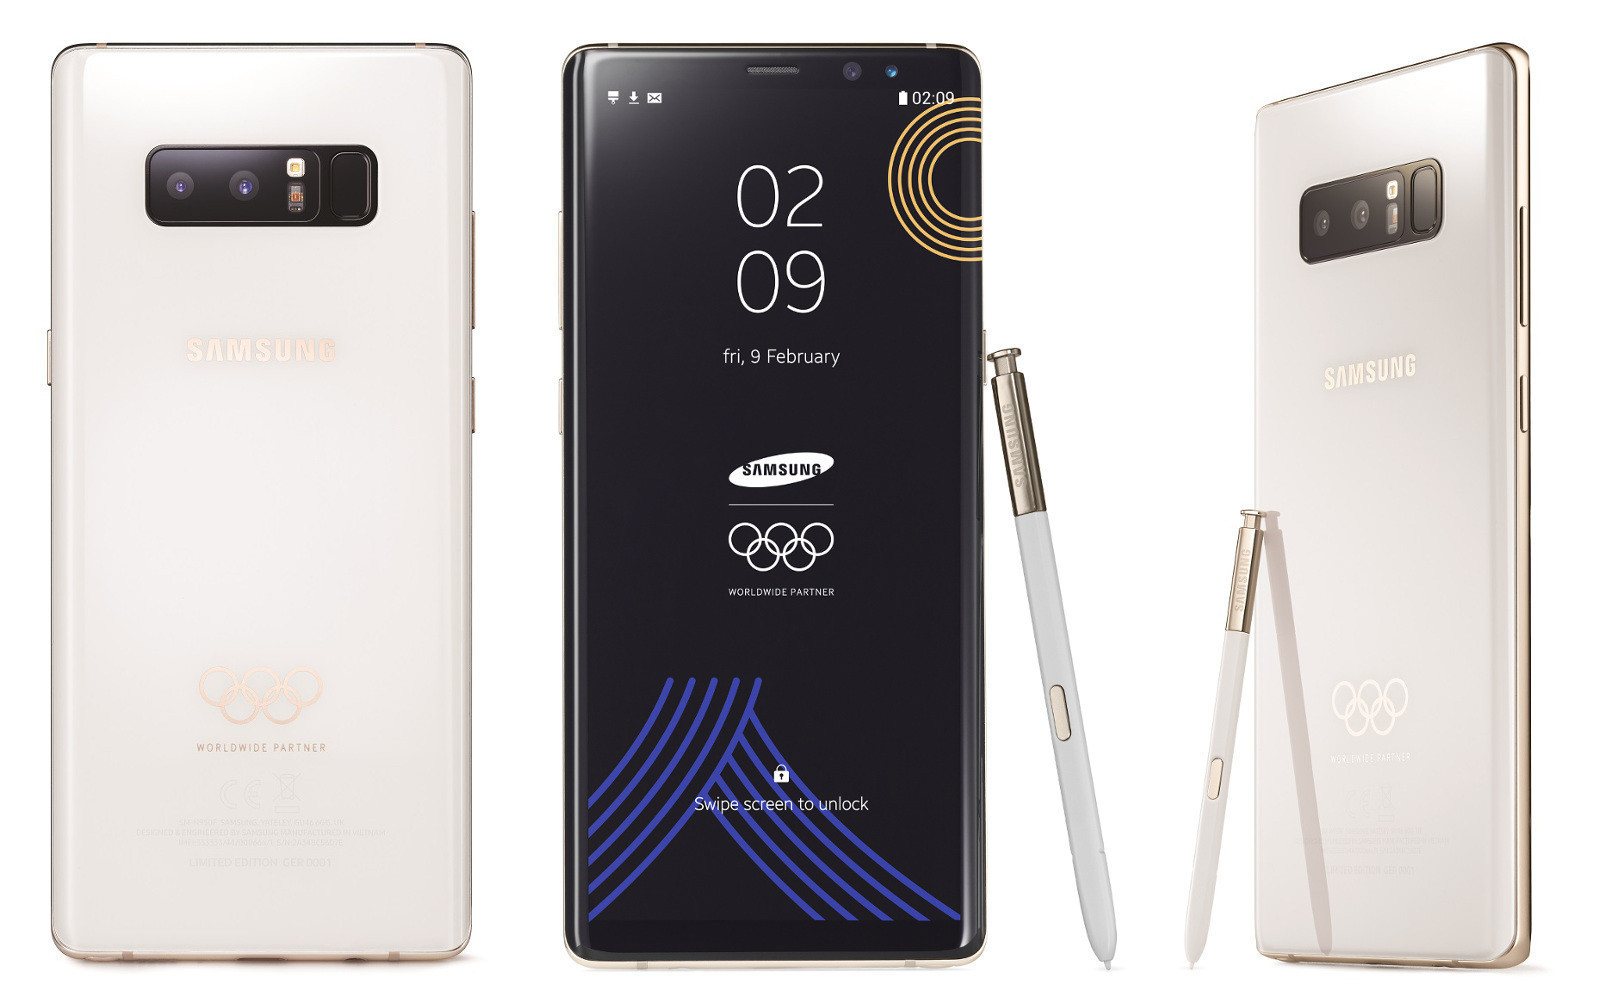 The Pyeongchang 2018 limited edition Samsung Galaxy Note8 includes a number of exclusive features ©Samsung